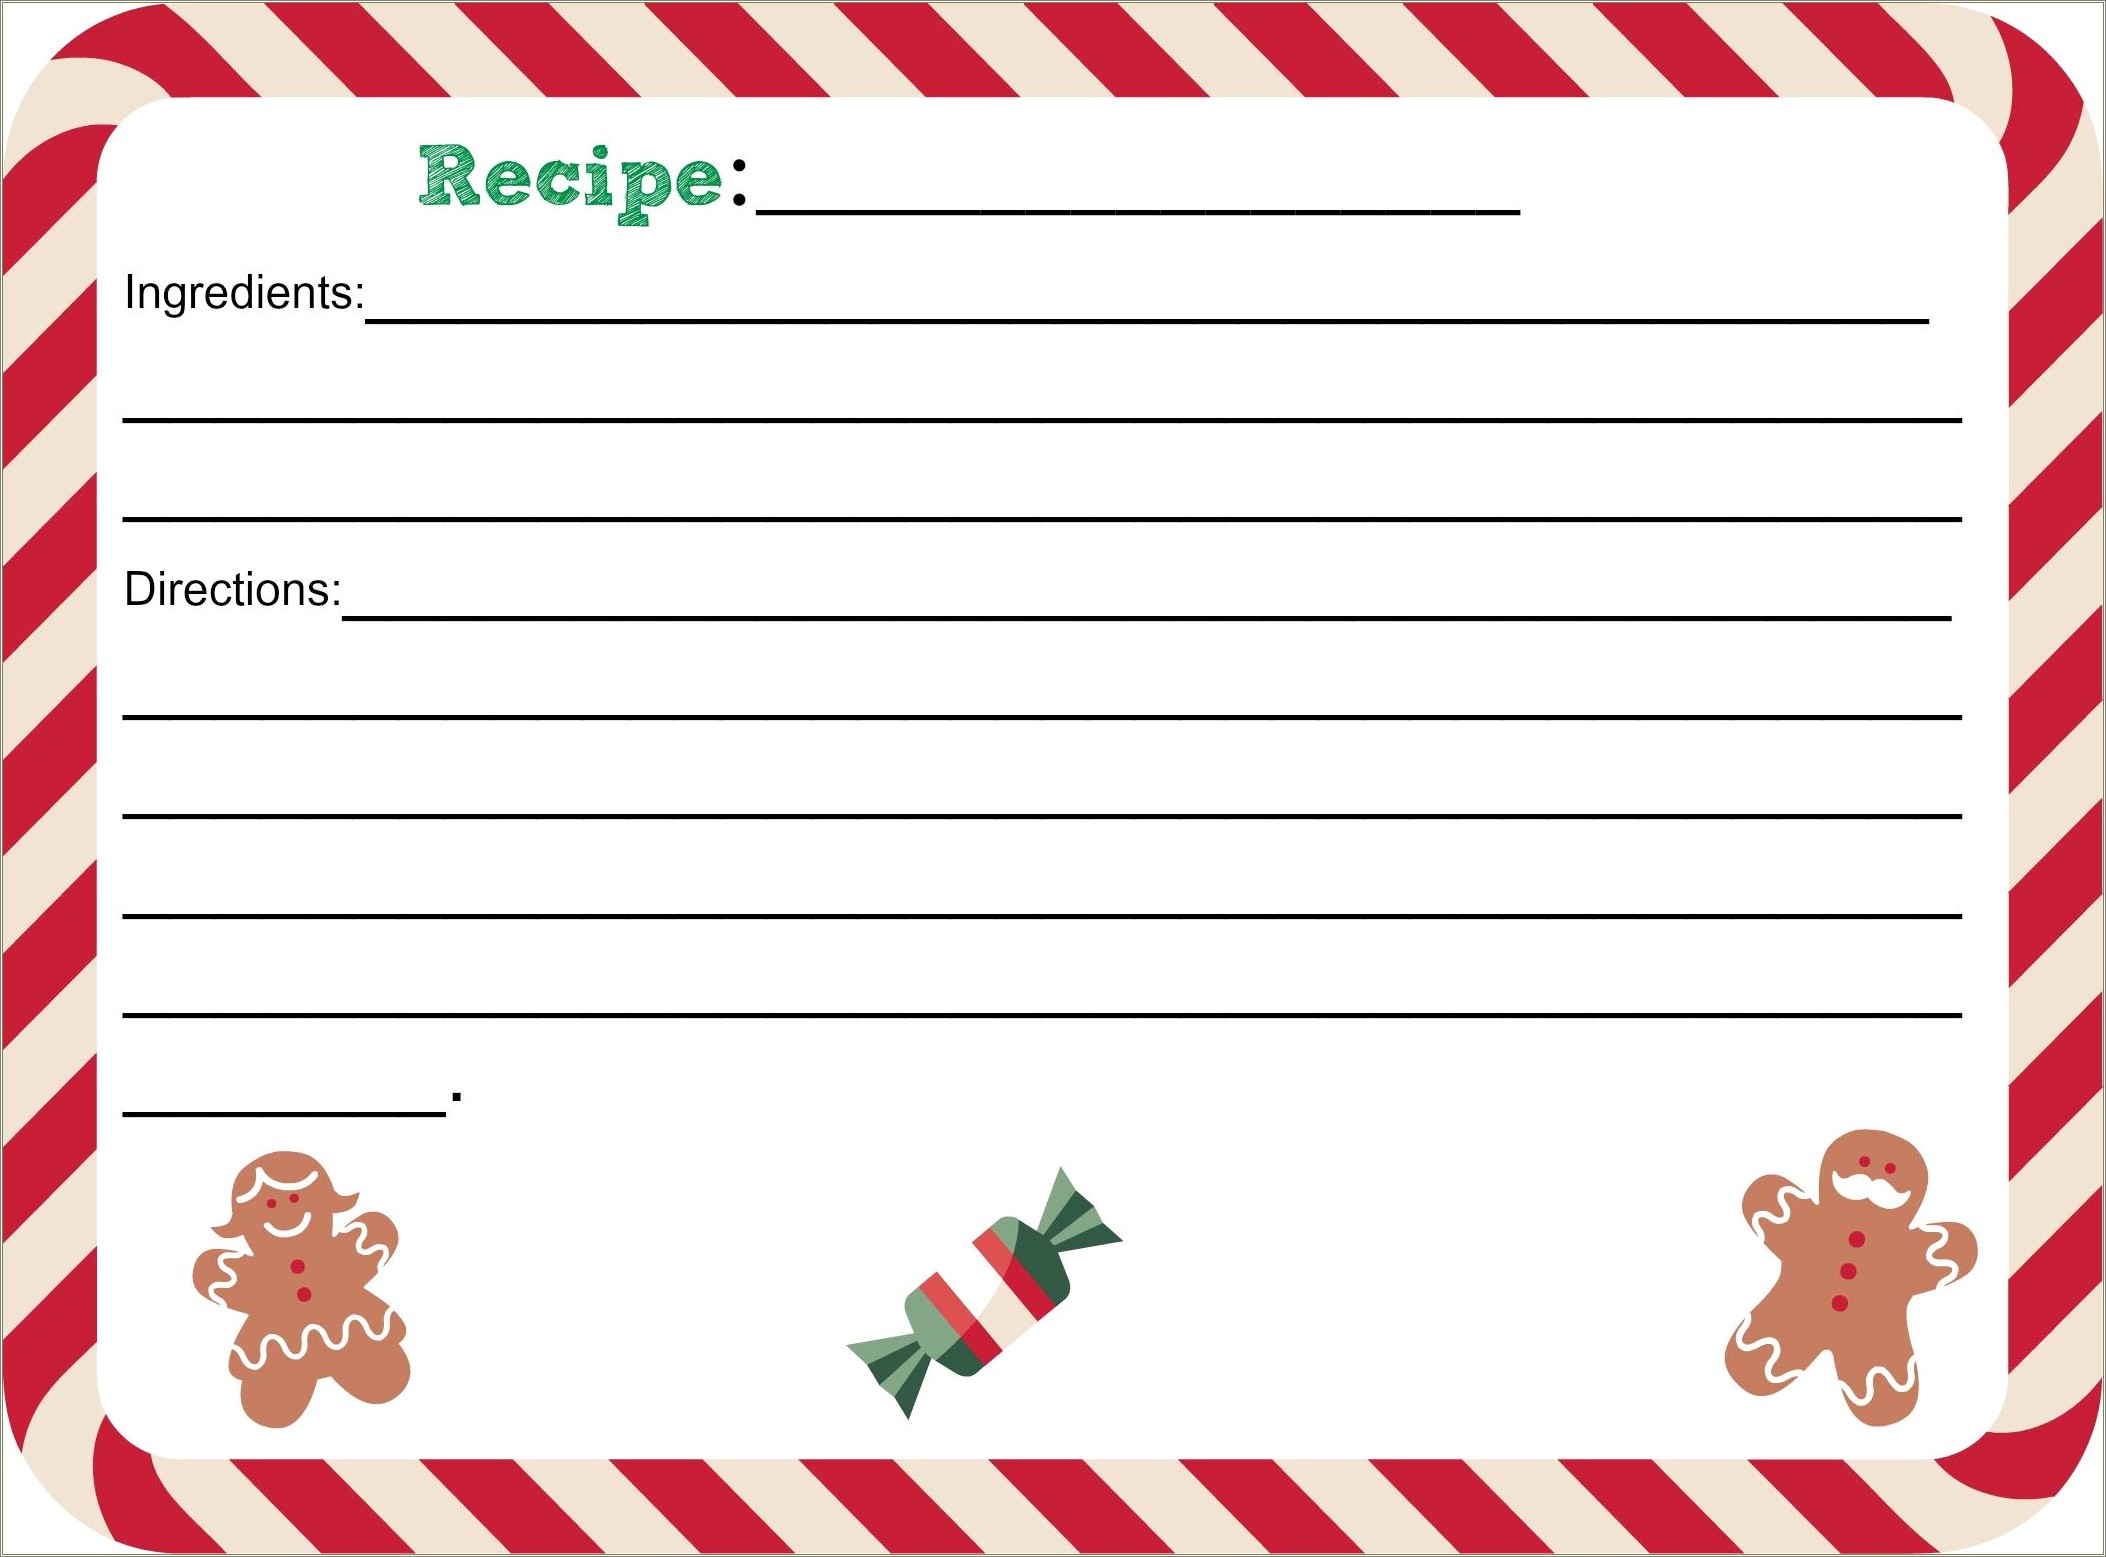 Free 4x6 Recipe Card Templates For Microsoft Word